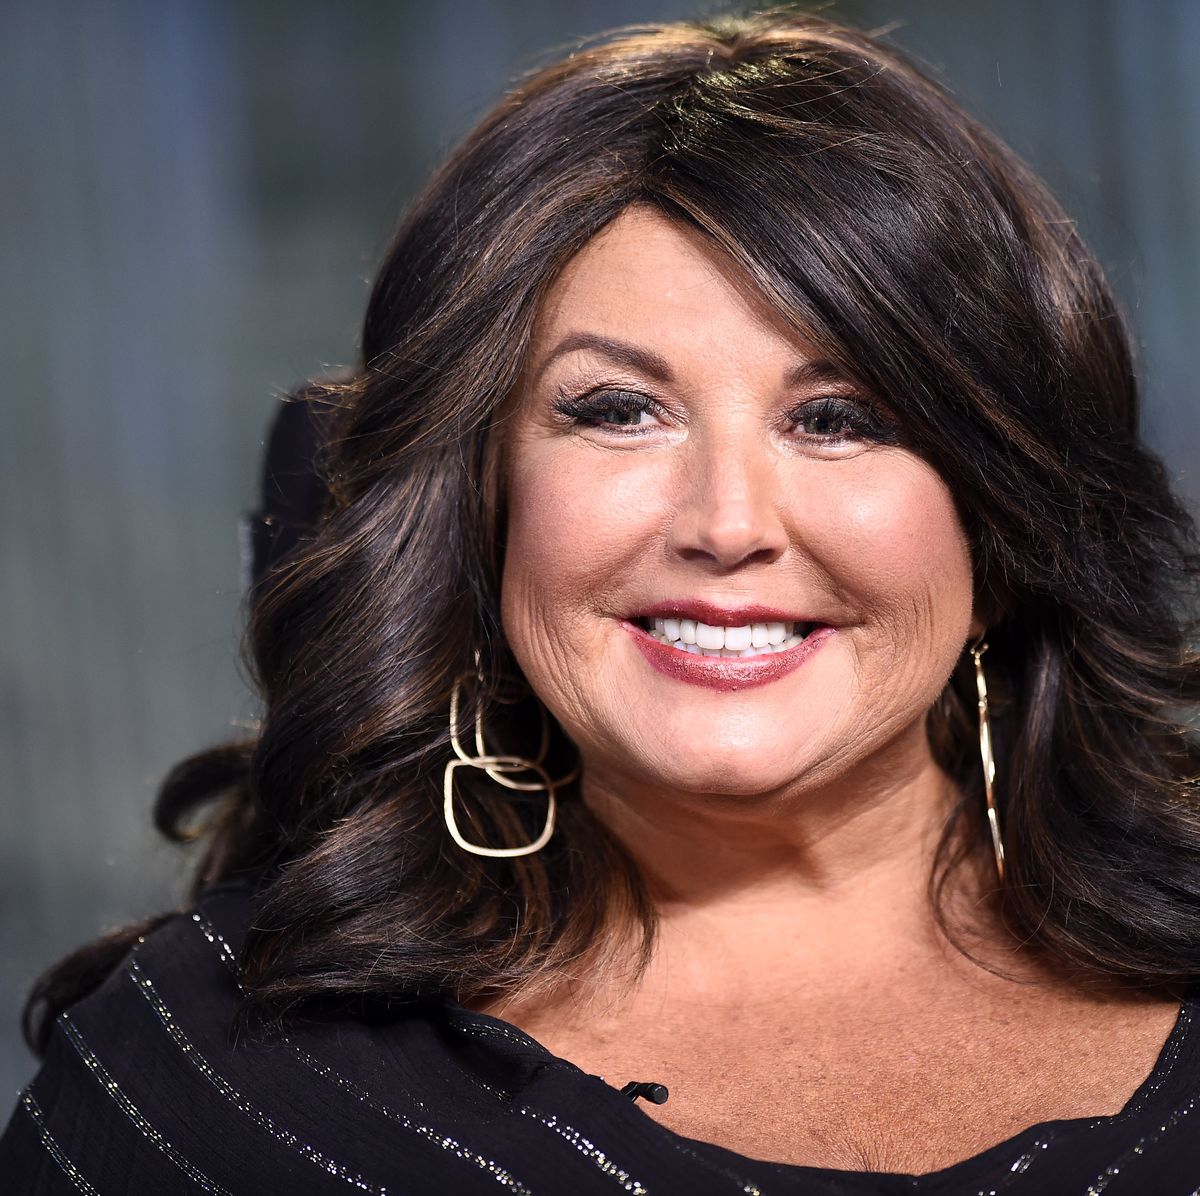 Abby Lee Miller's Lifetime Series Canceled After Racism